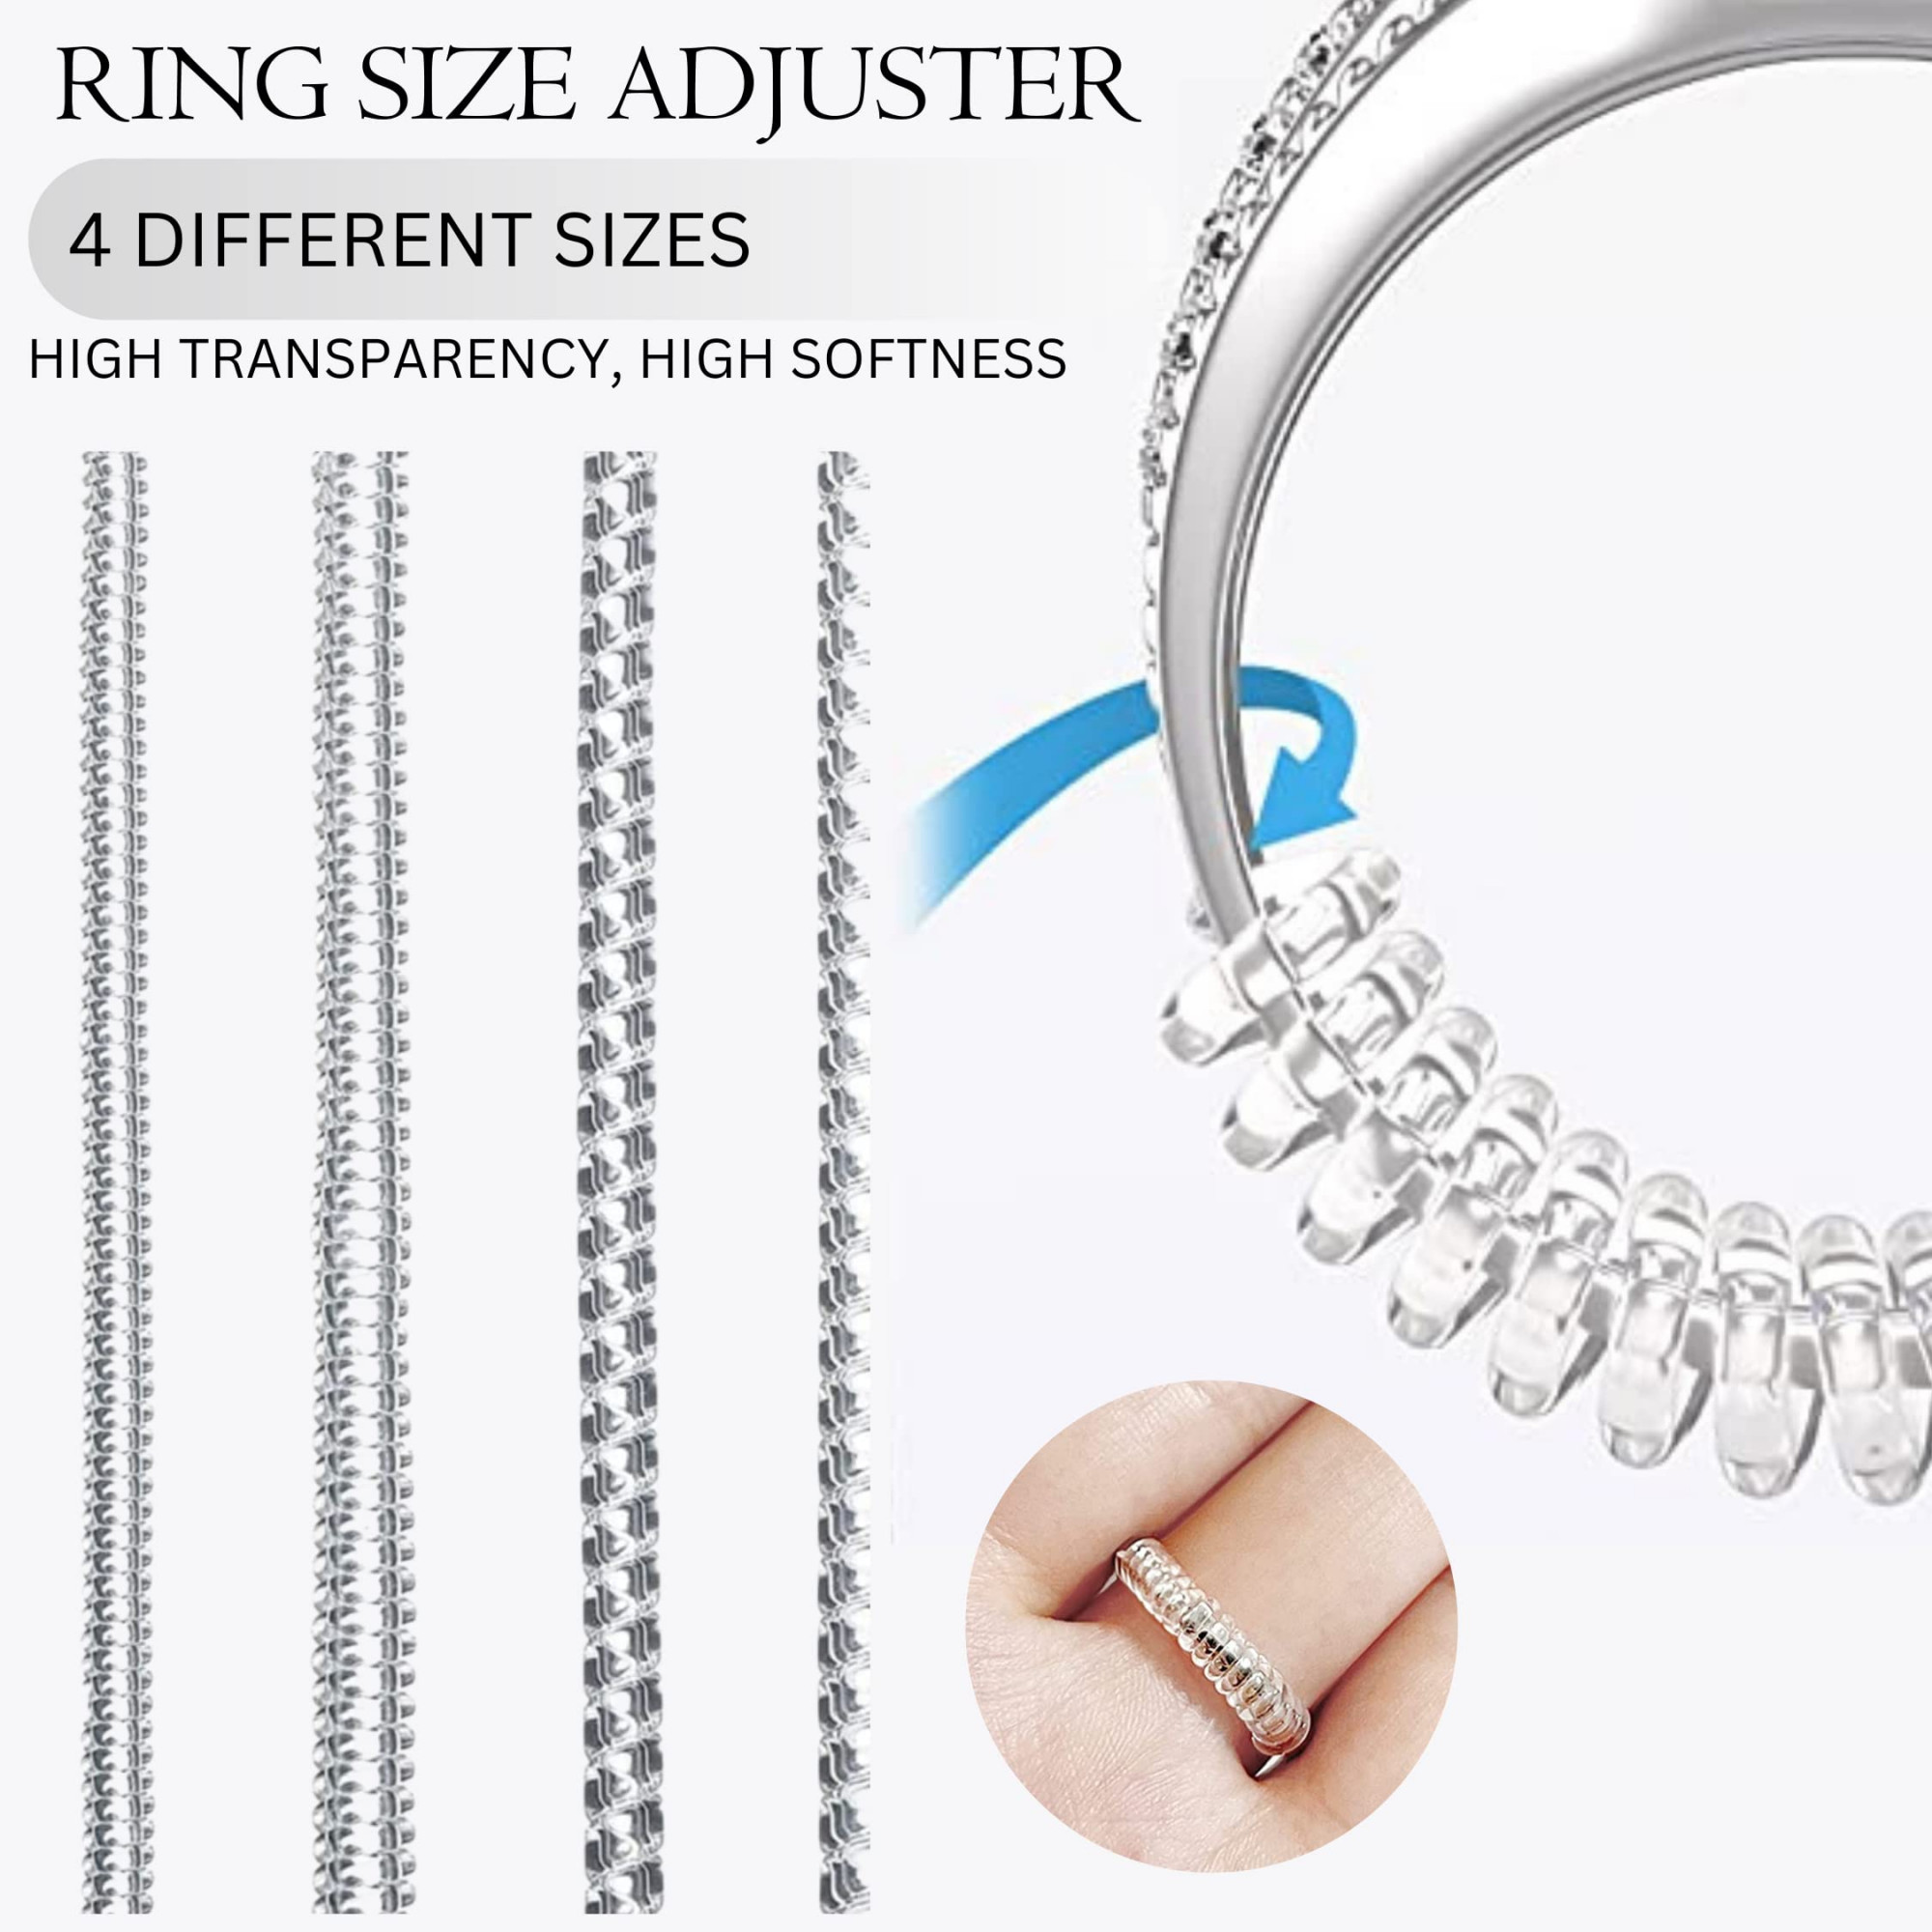 SAIELLIN Ring Size Adjuster For Loose Rings, Plastic Ring Adjuster For  Loose Rings